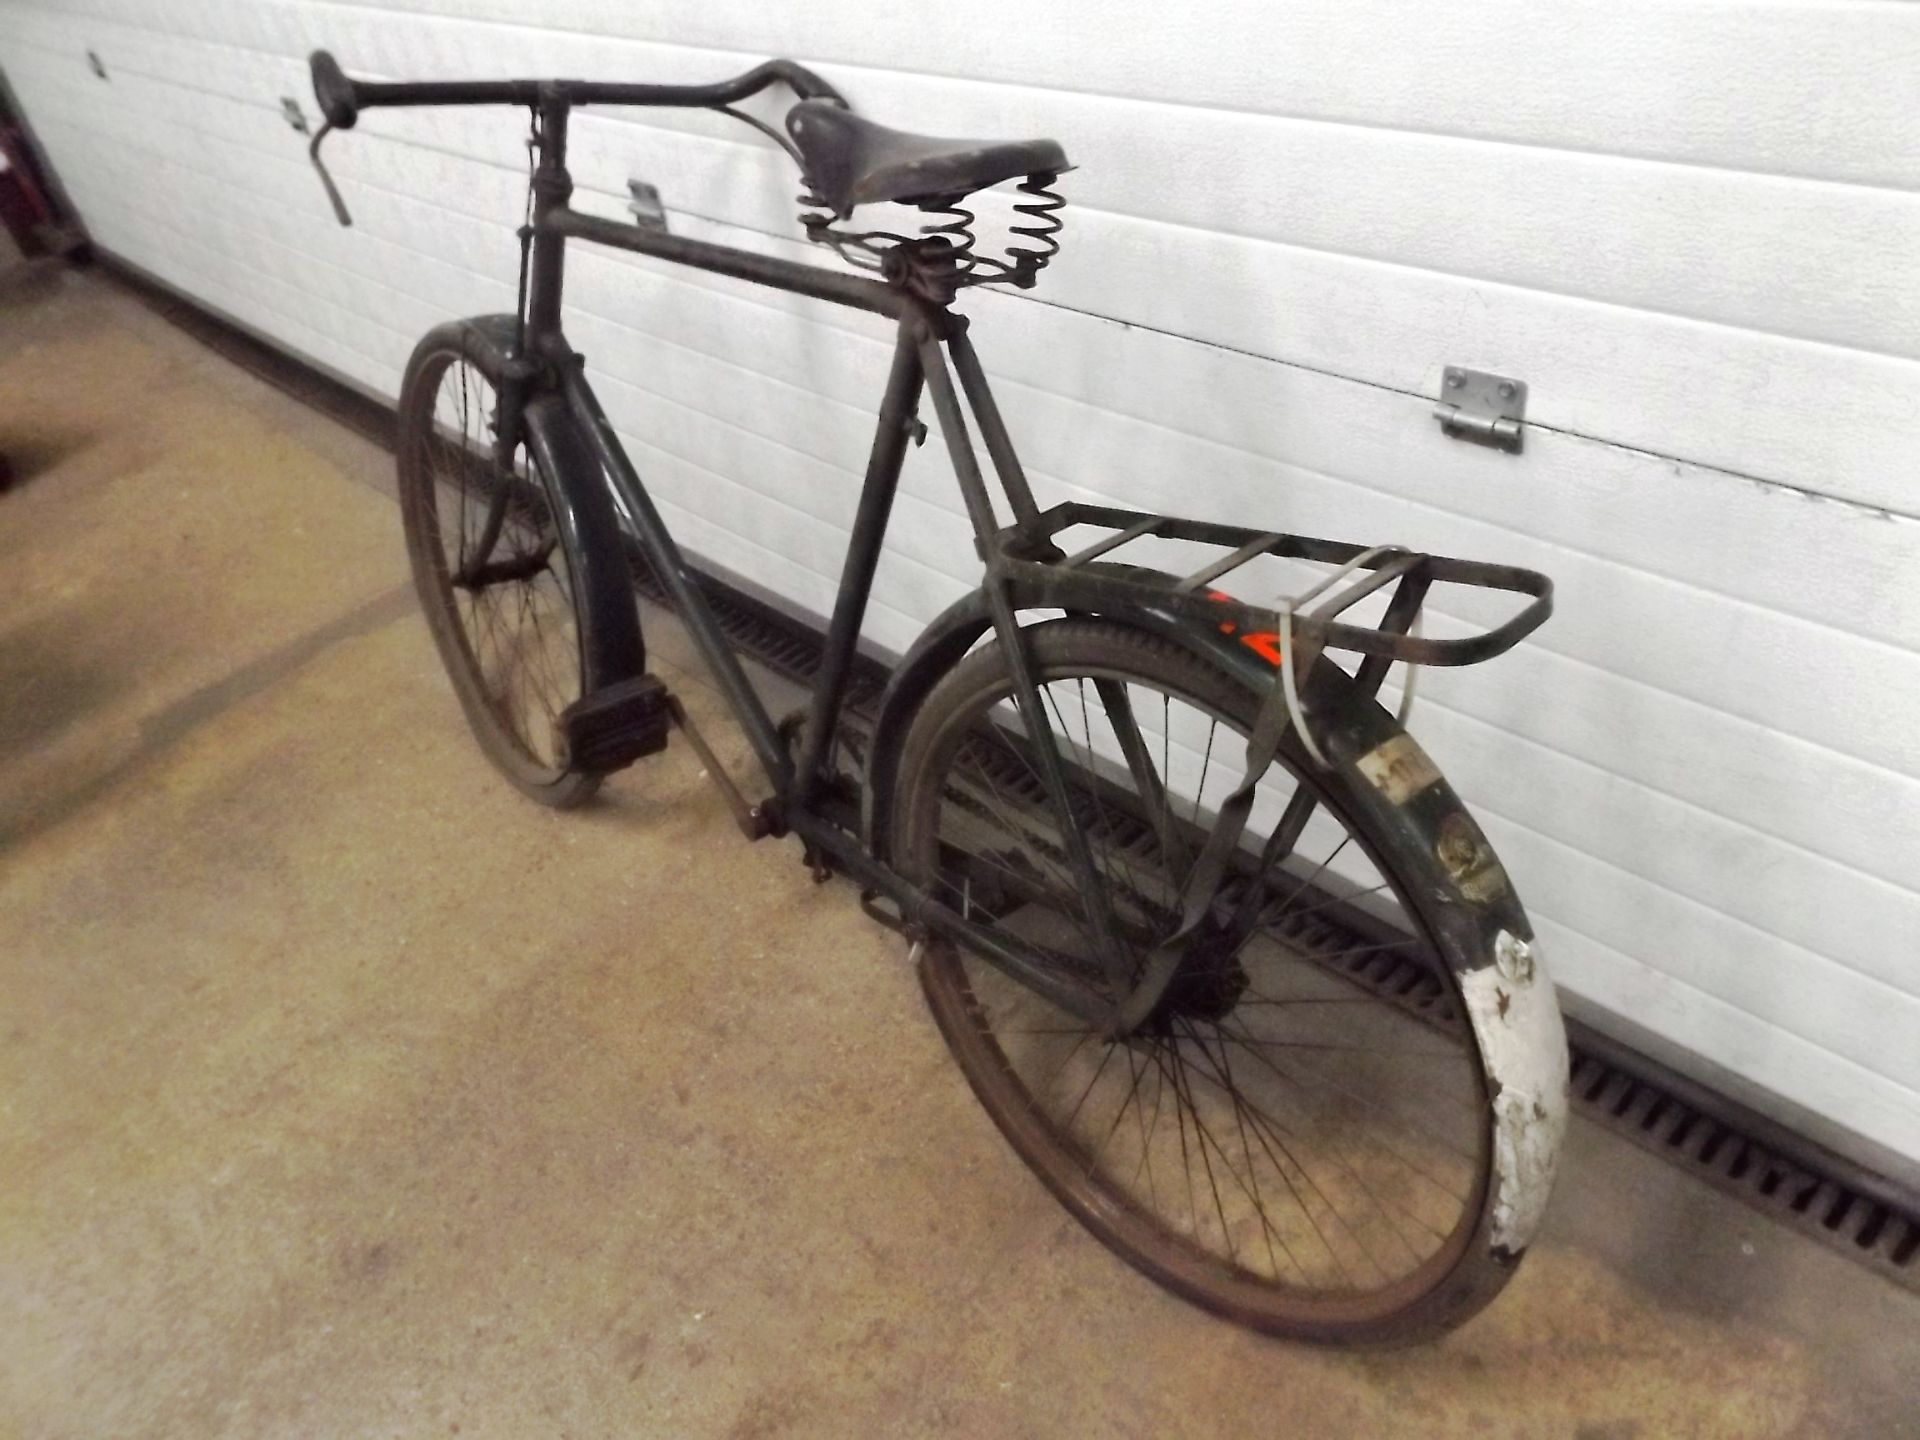 Phillips Mk V* Army Bicycle - Extremely Rare and Collectable - Image 3 of 11